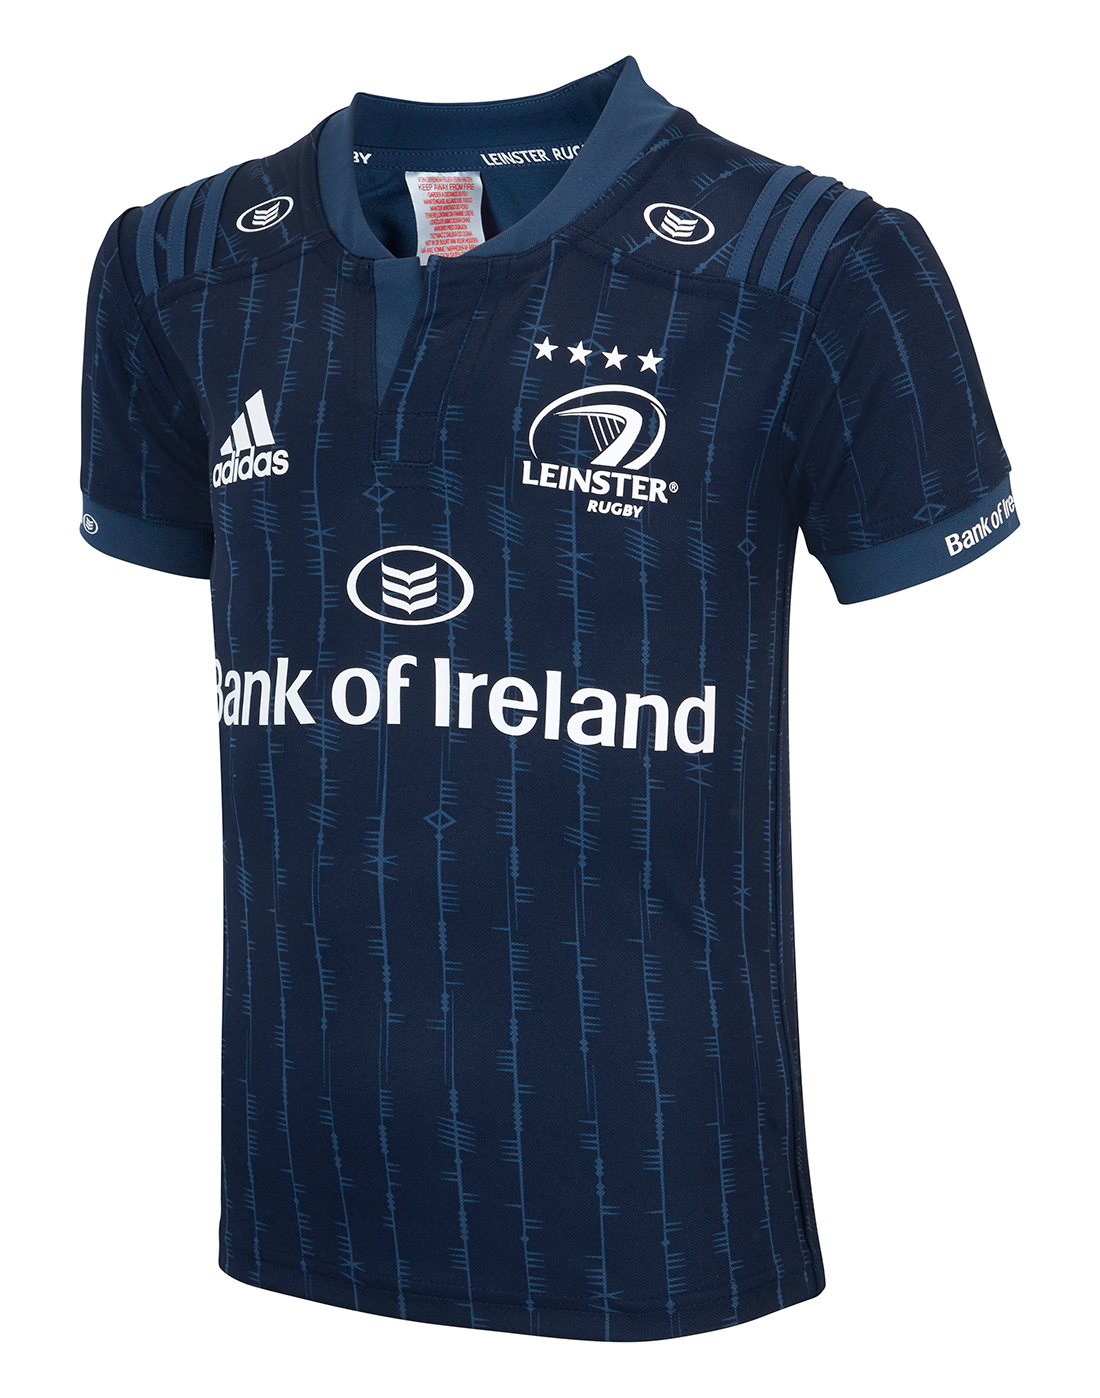 European Rugby Jersey | Life Style Sports